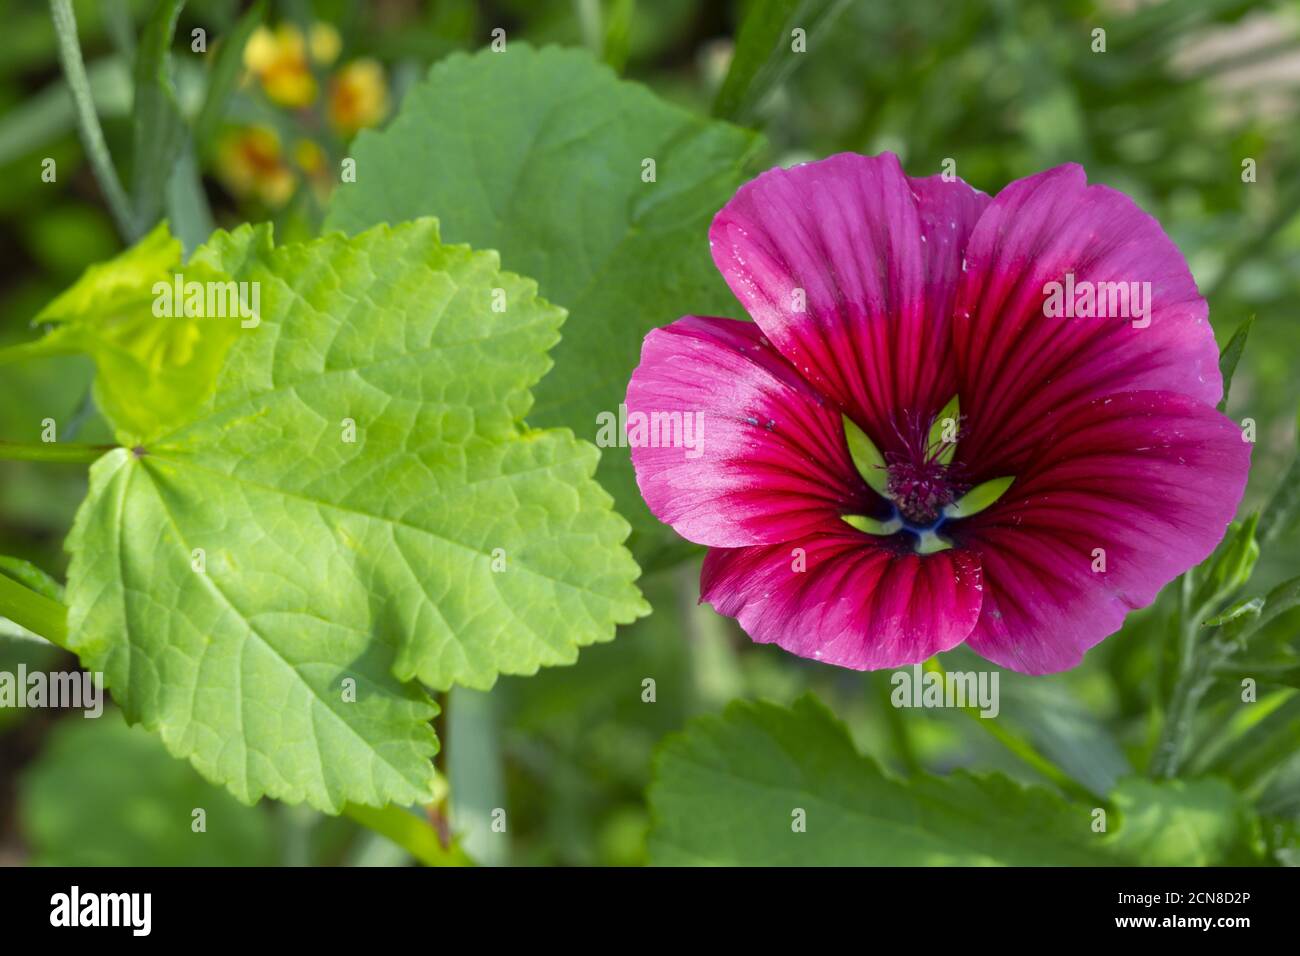 Bloom of a Mallow Stock Photo